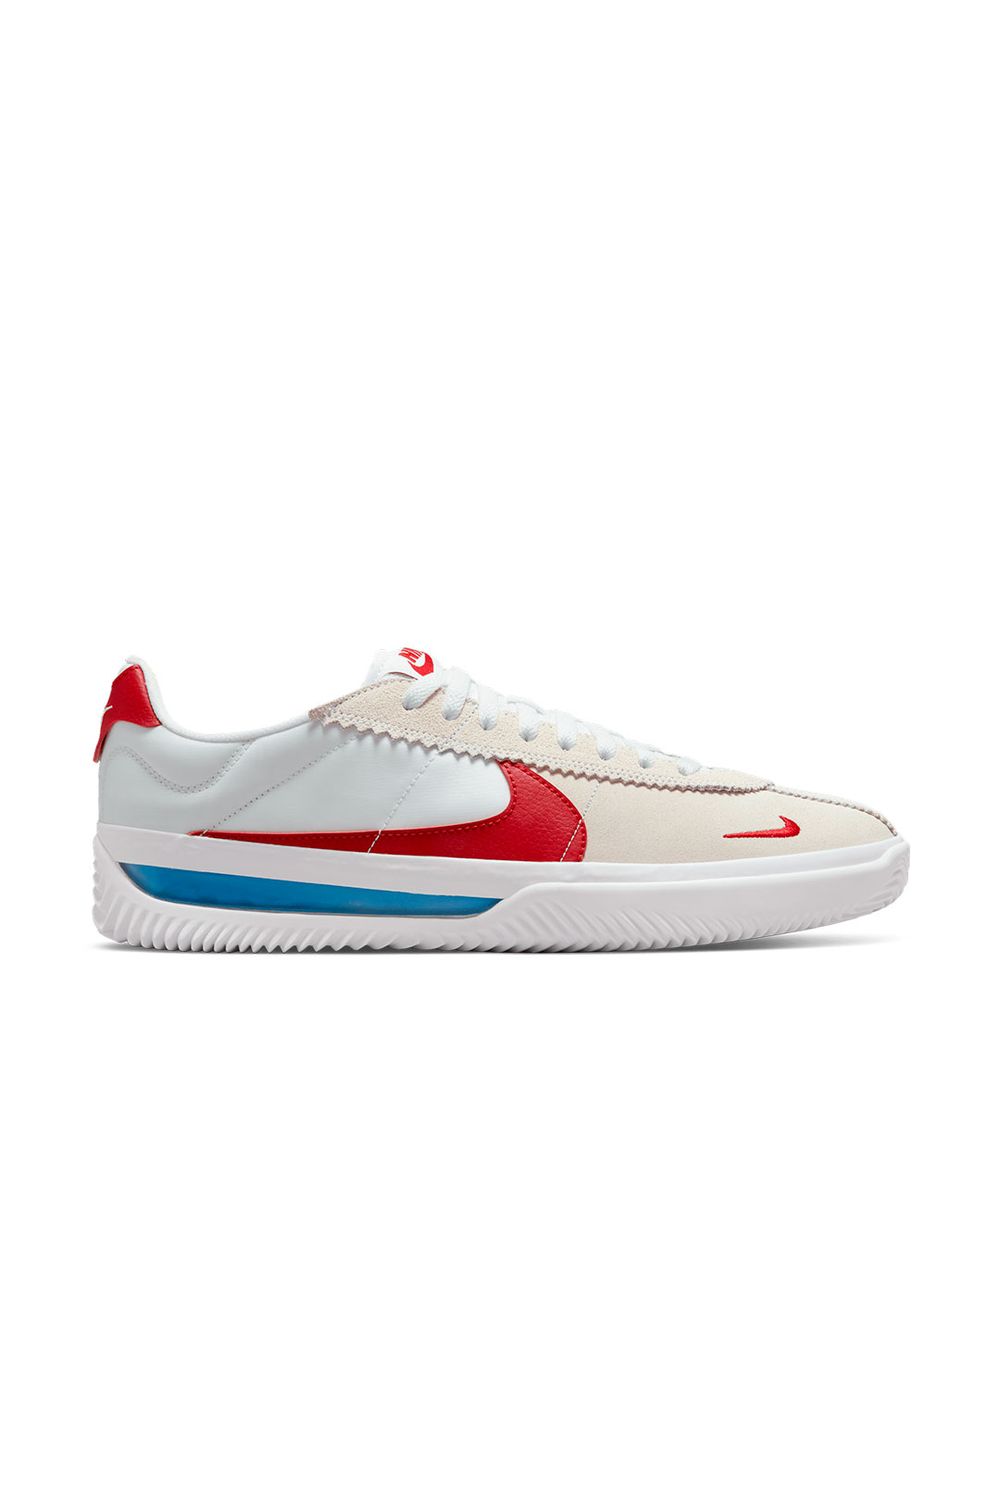 NIKE TENIS CASUAL HOMBRE NIKE BRSB